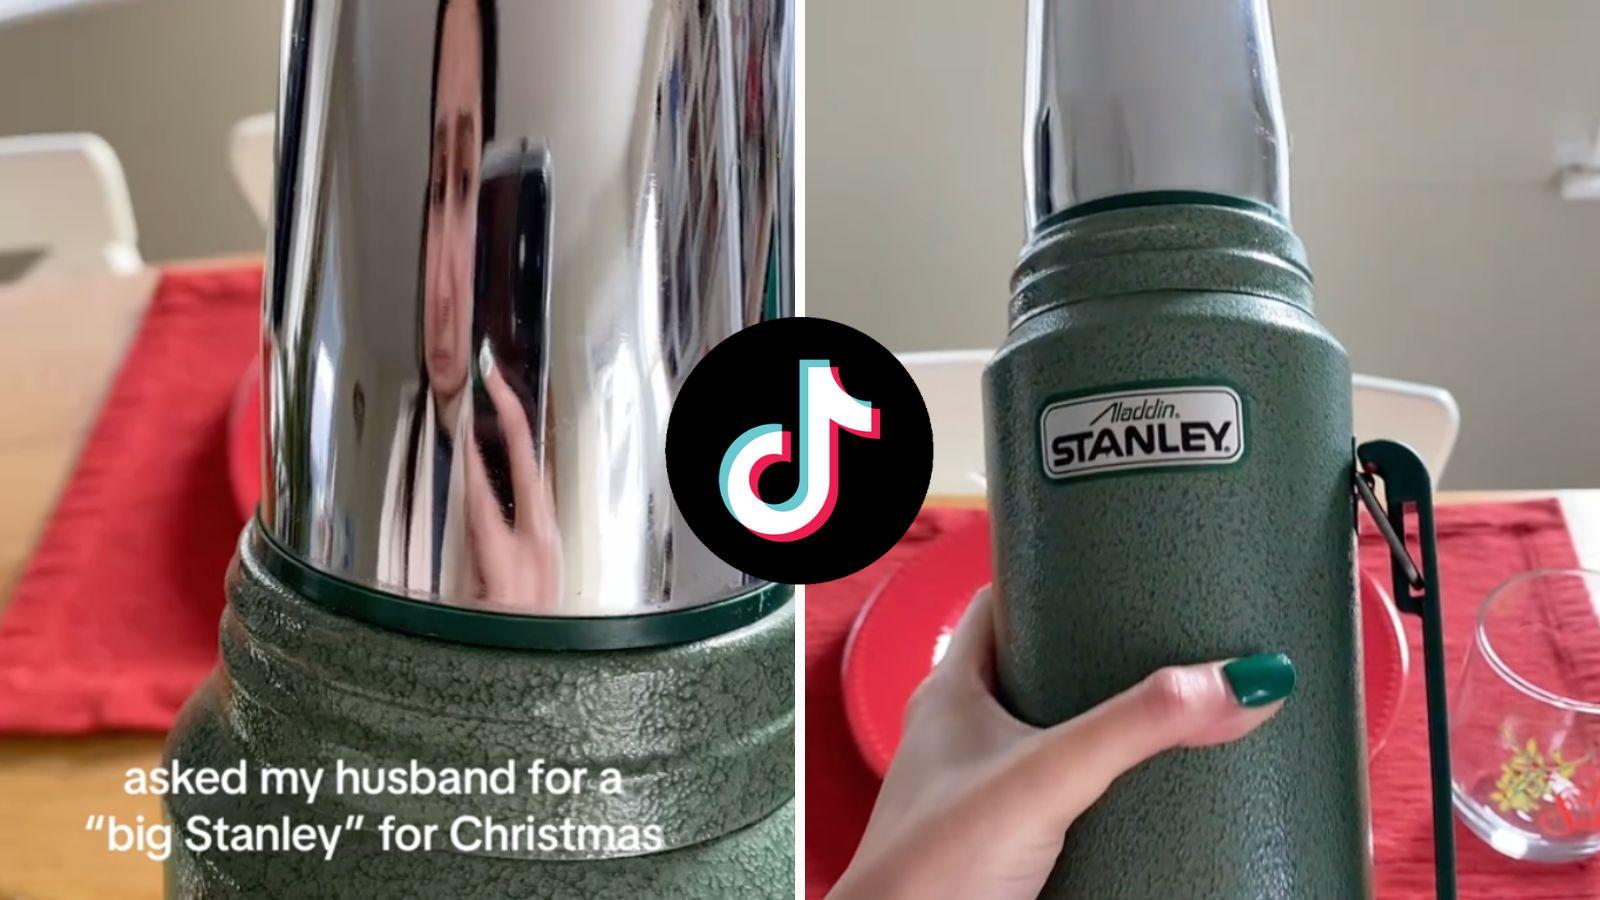 My wife asked for some new Stanley cups this Christmas. : r/BambuLab